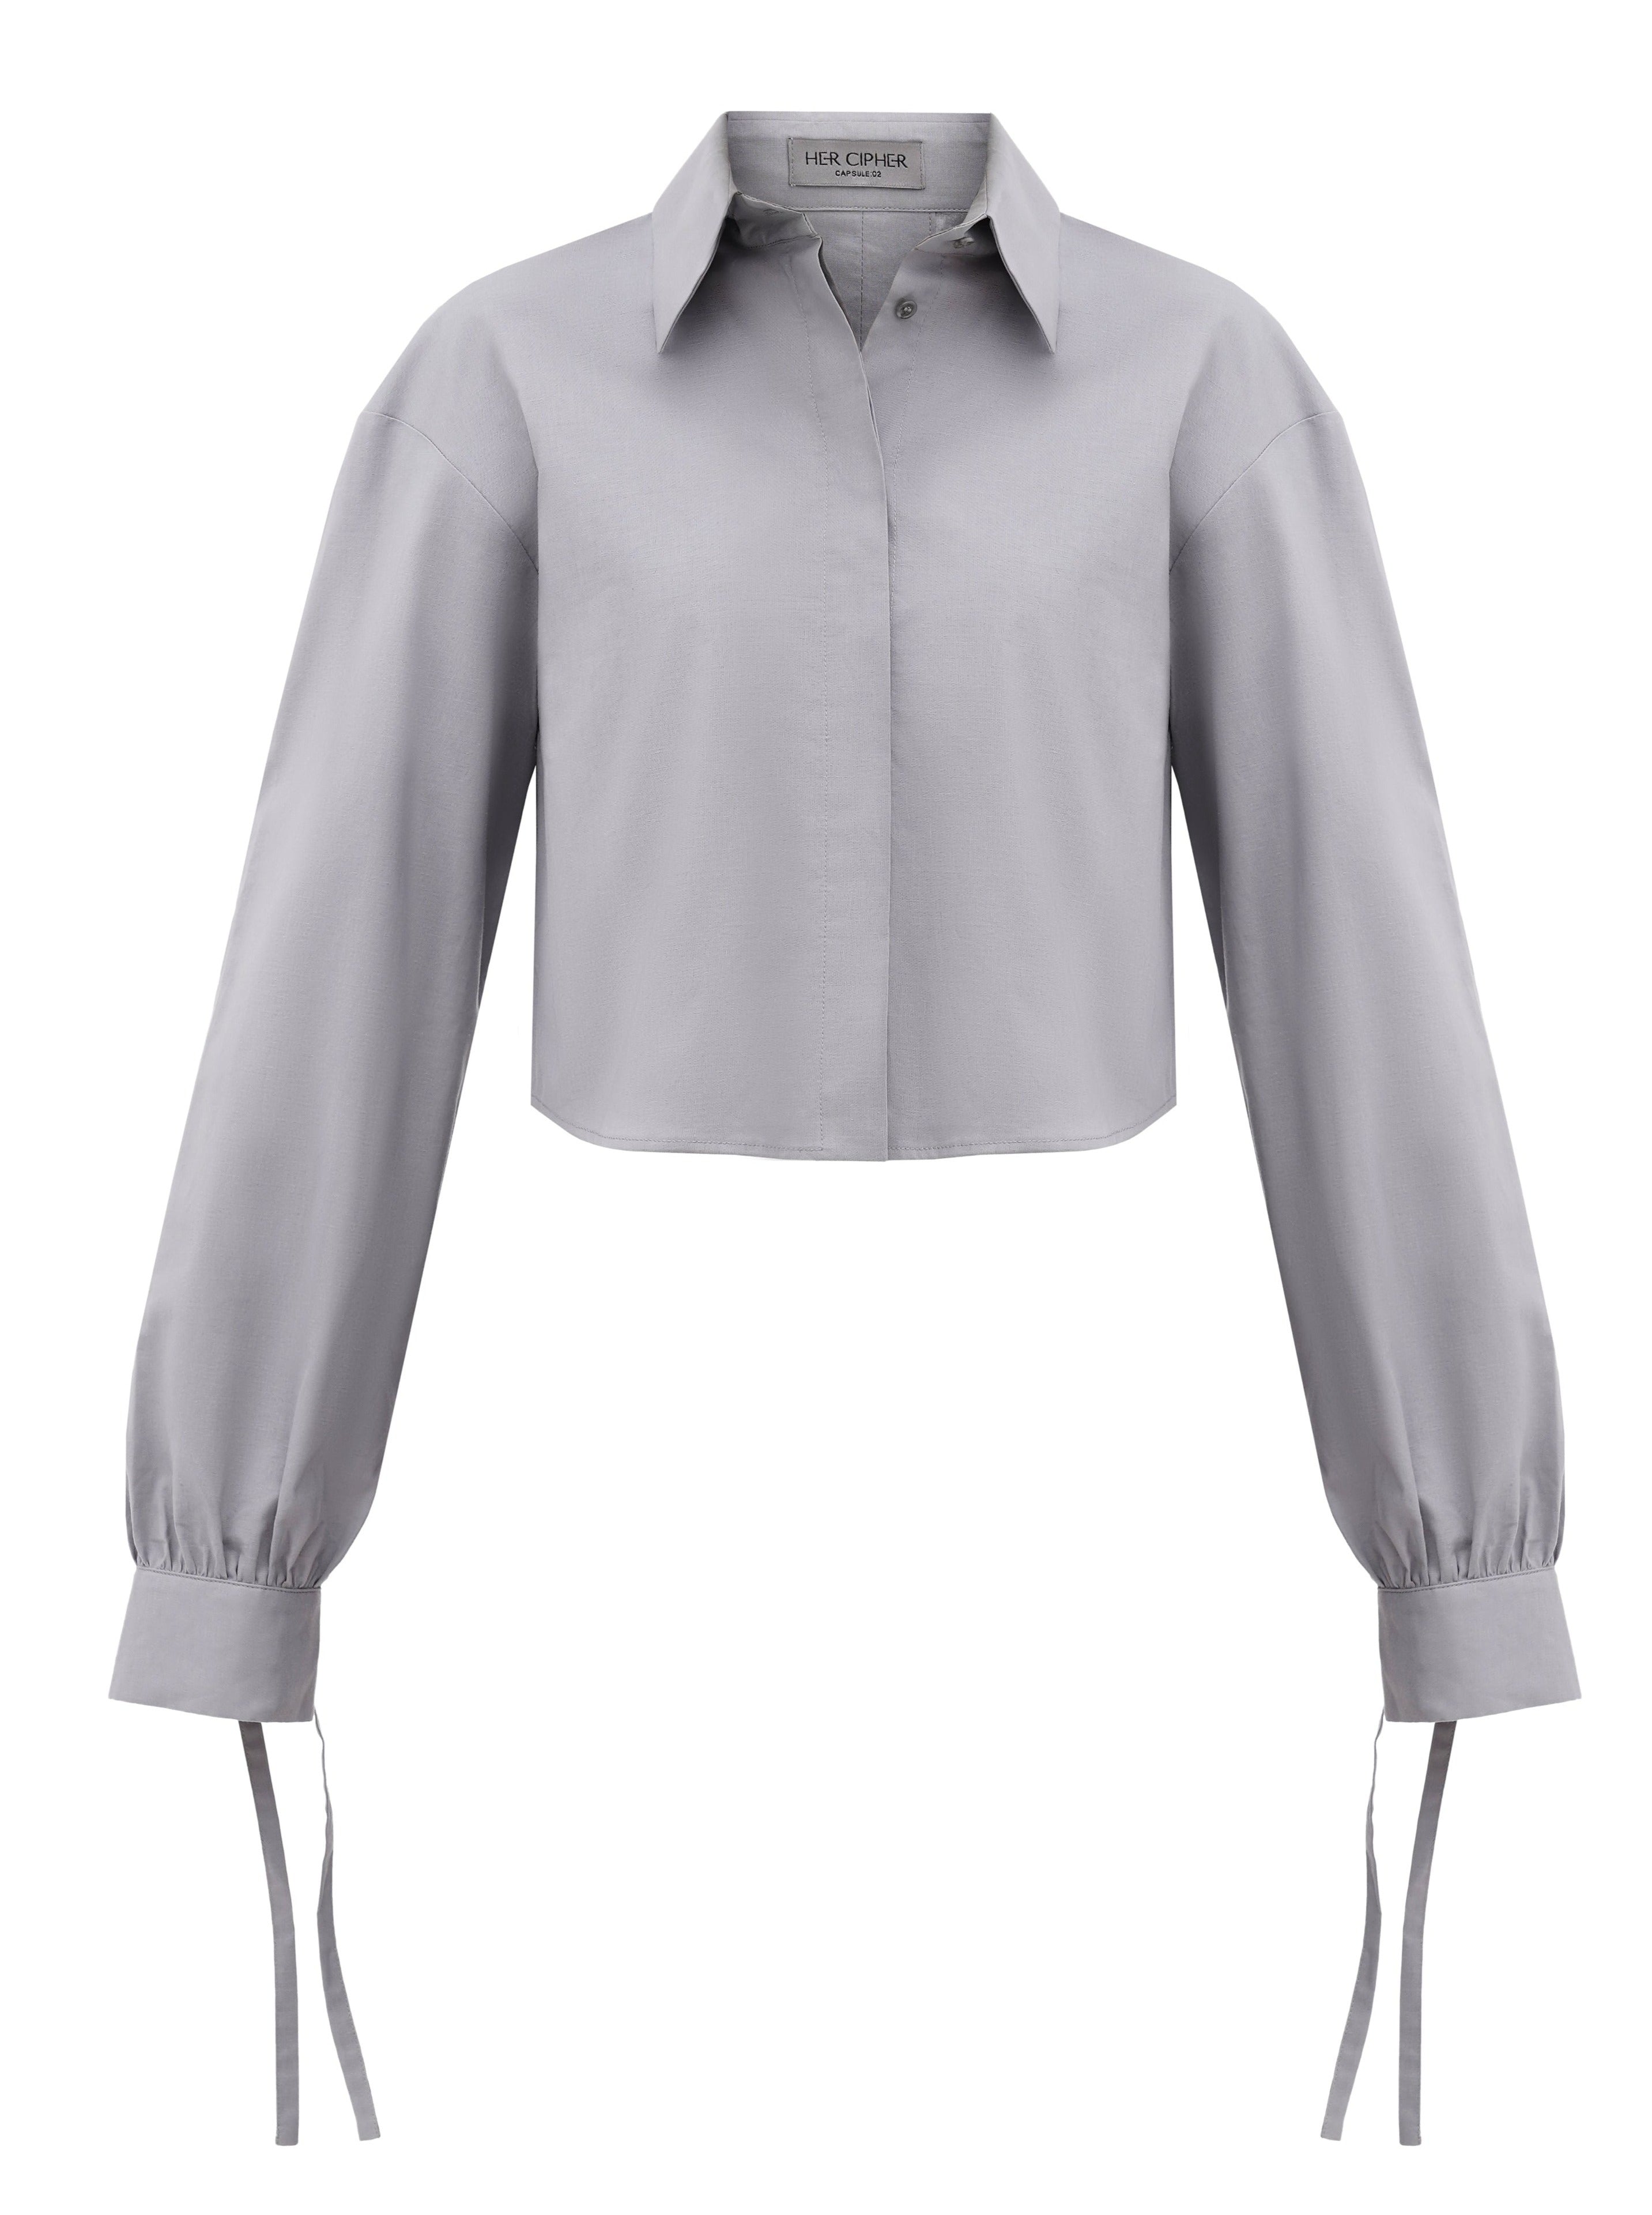 A grey cropped button up shirt created from organic cotton certified with GOTS with tie details on sleeves